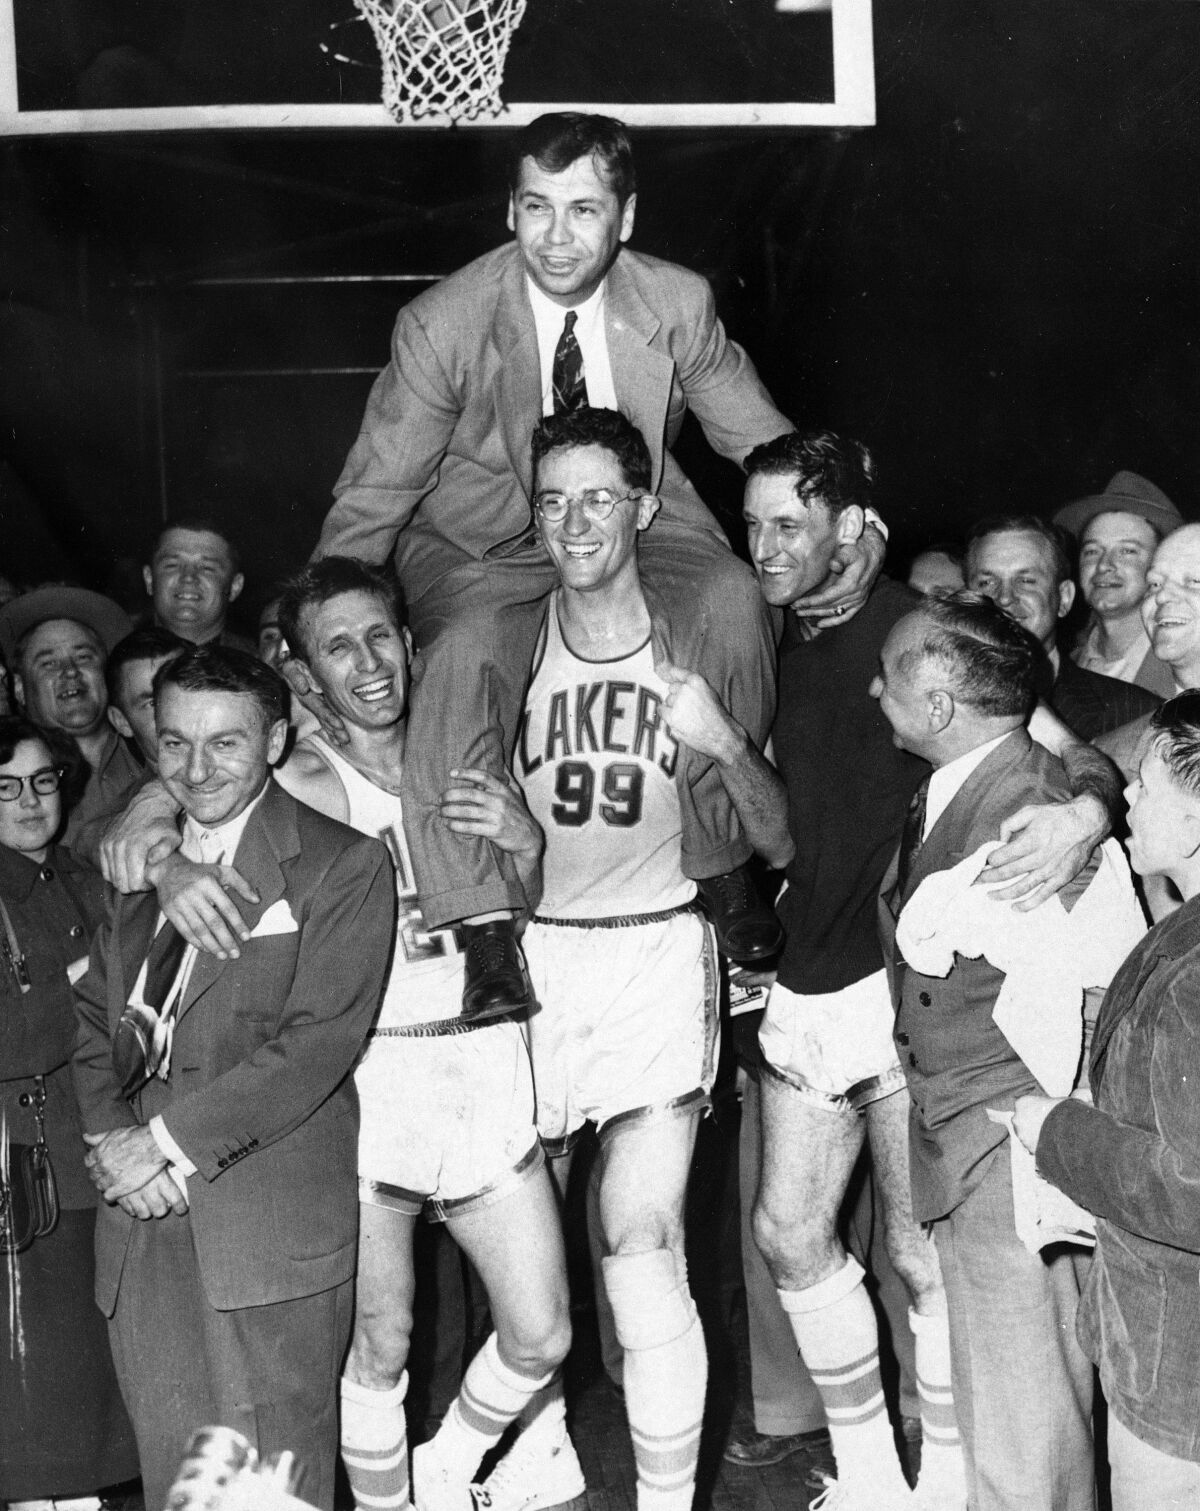 Minneapolis Lakers hoist coach John Kundla and carry him to their dressing room.